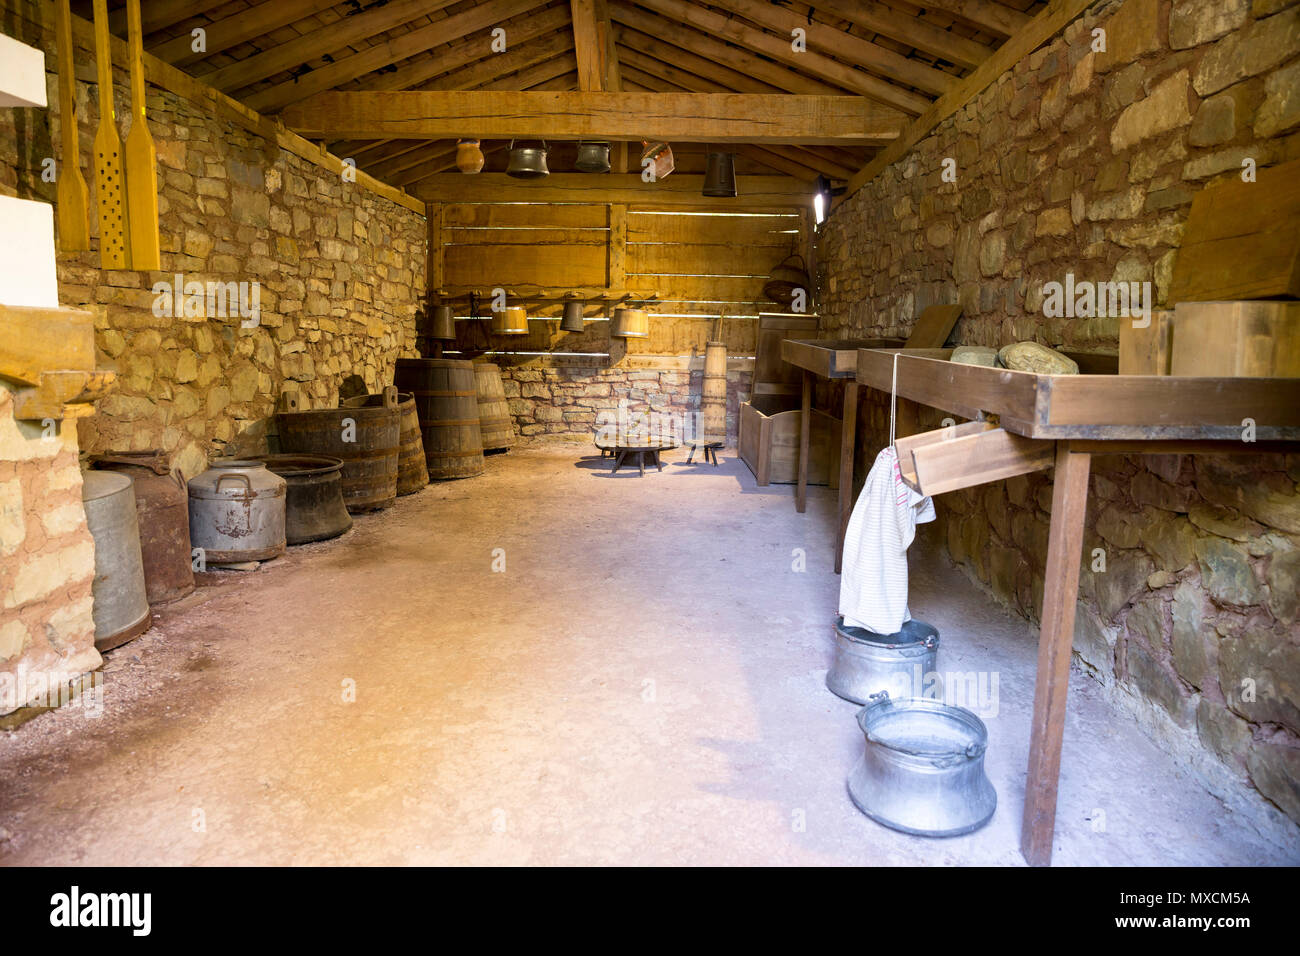 Old traditional dairy room typical for Bulgarian culture in the past. Stock Photo